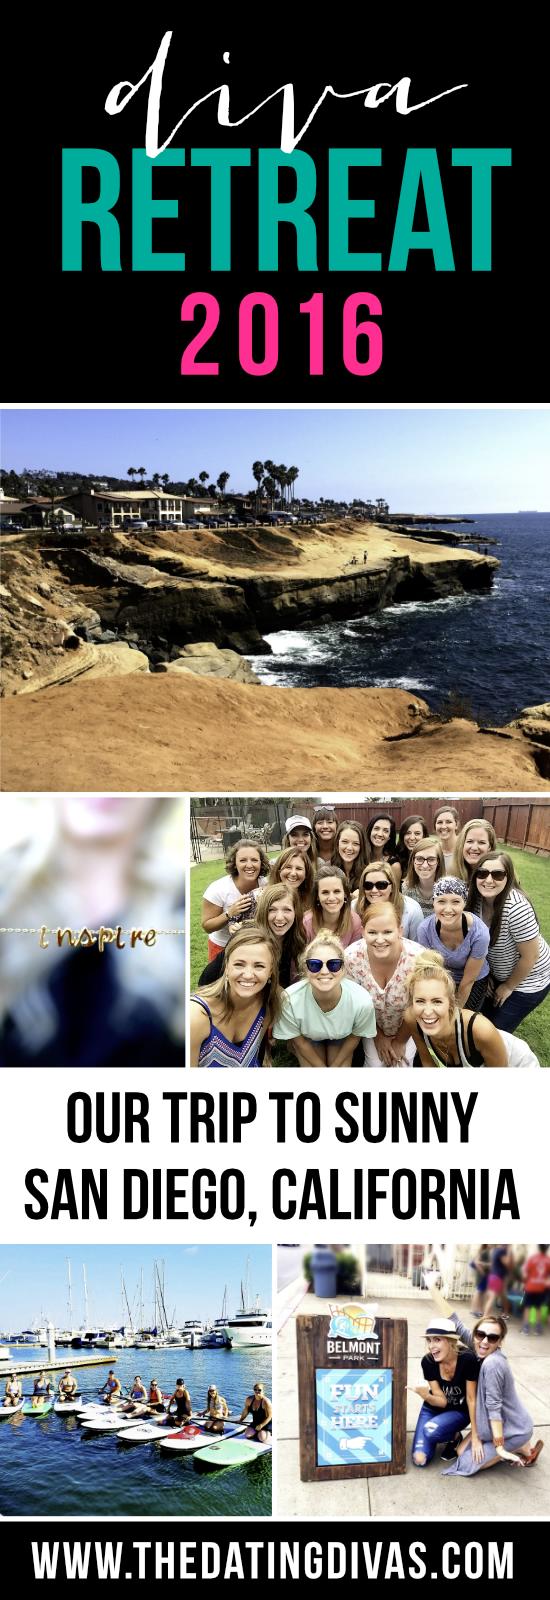 This is my dream vacation! I am totally going to plan my own business retreat, reunion or girls only weekend at this exact spot! So many fun things to do in San Diego California and that ocean front house with the pool? Such a fun ladies only business trip!